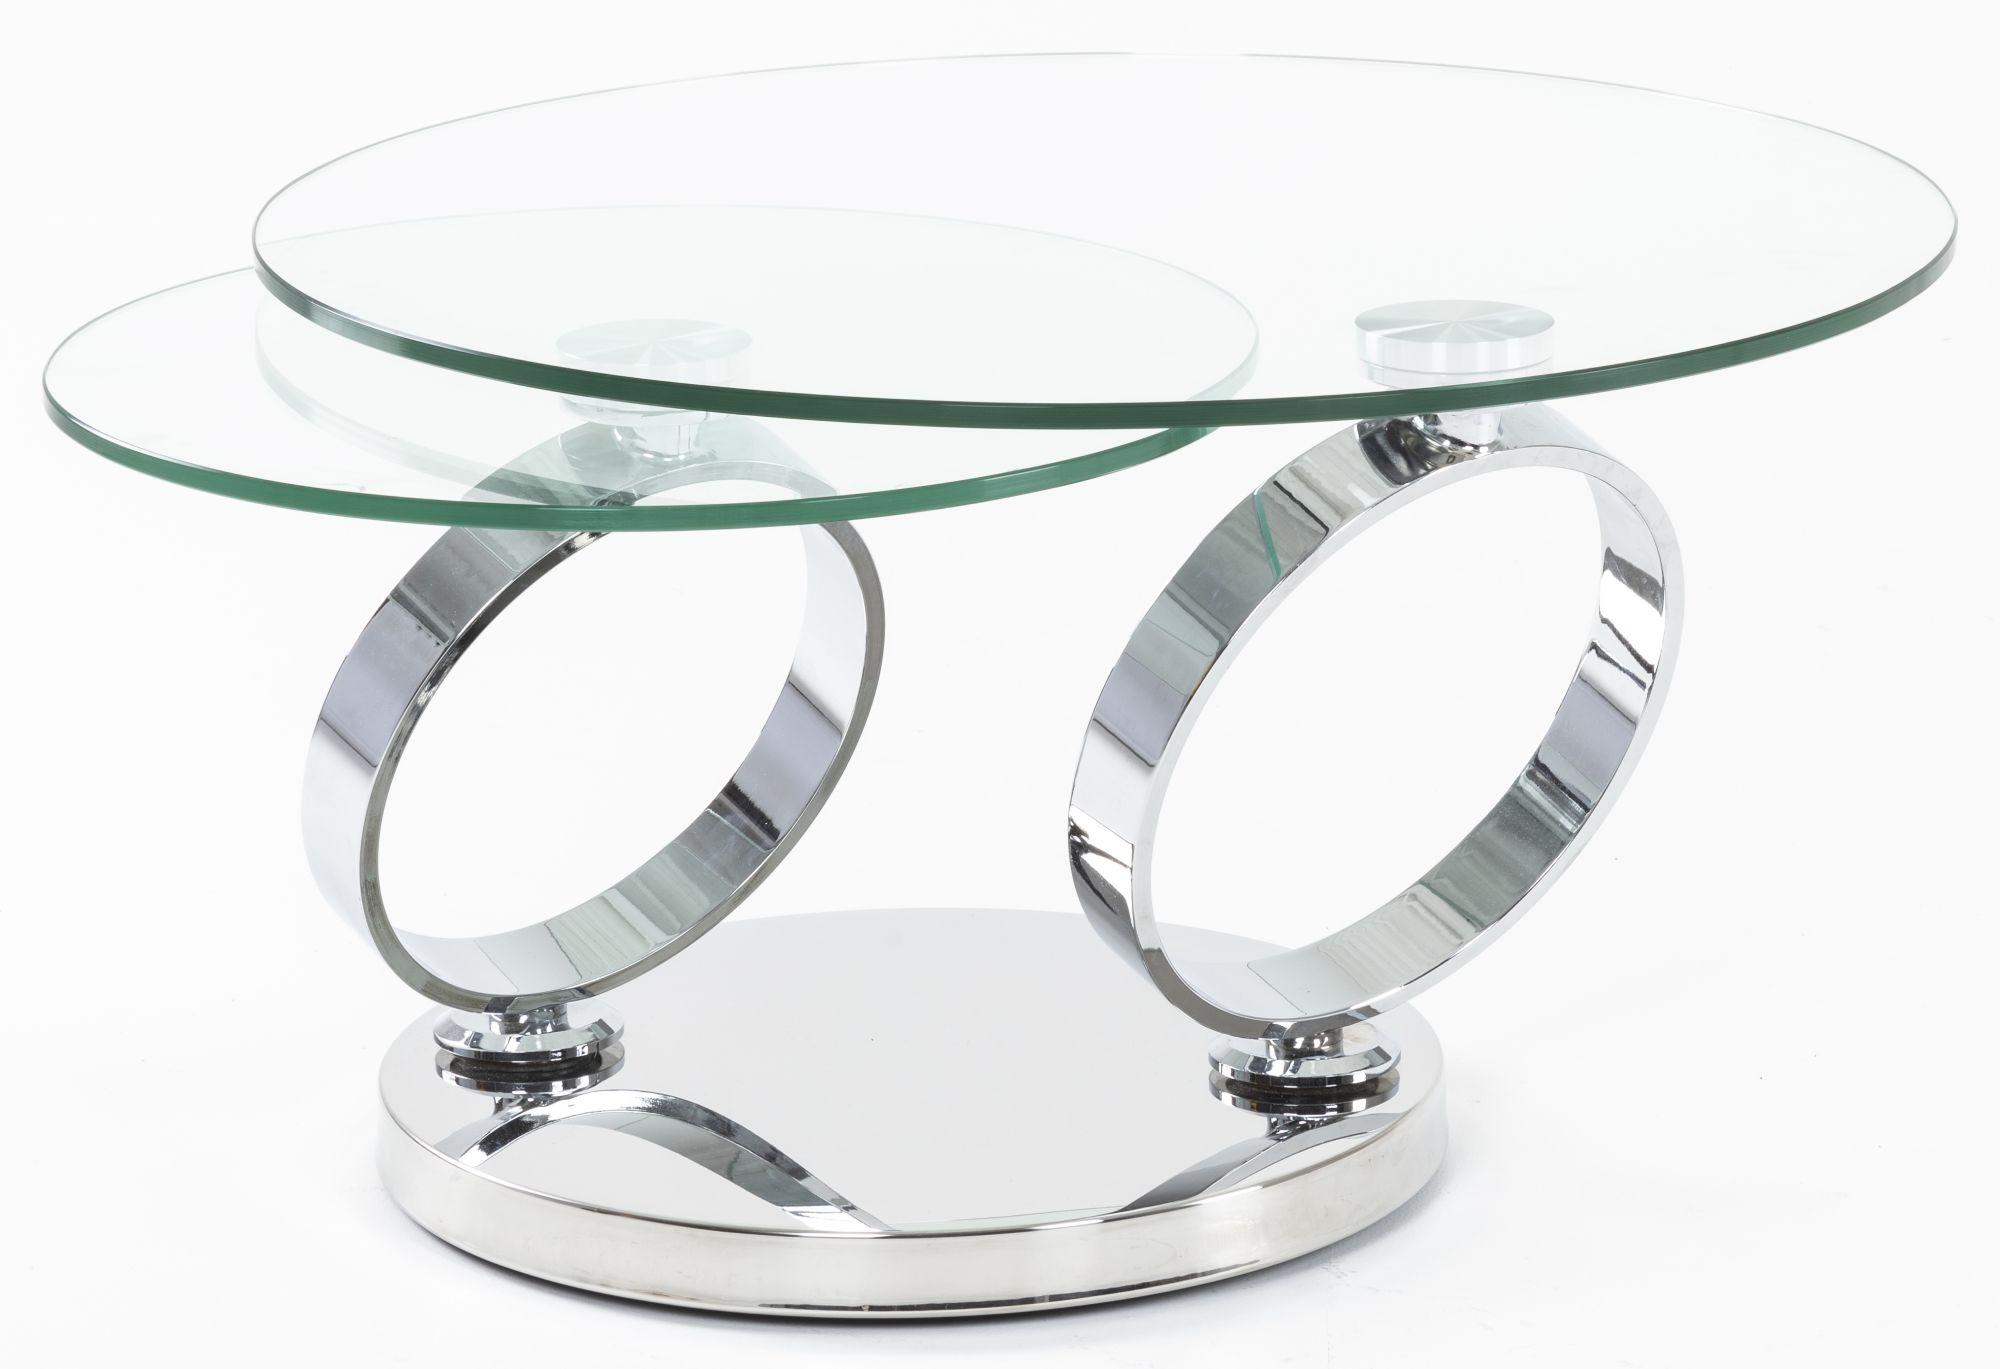 Circles Swivel Glass Coffee Table, 2 Tier Round Rotating Glass Top with Stainless Steel Chrome Frame